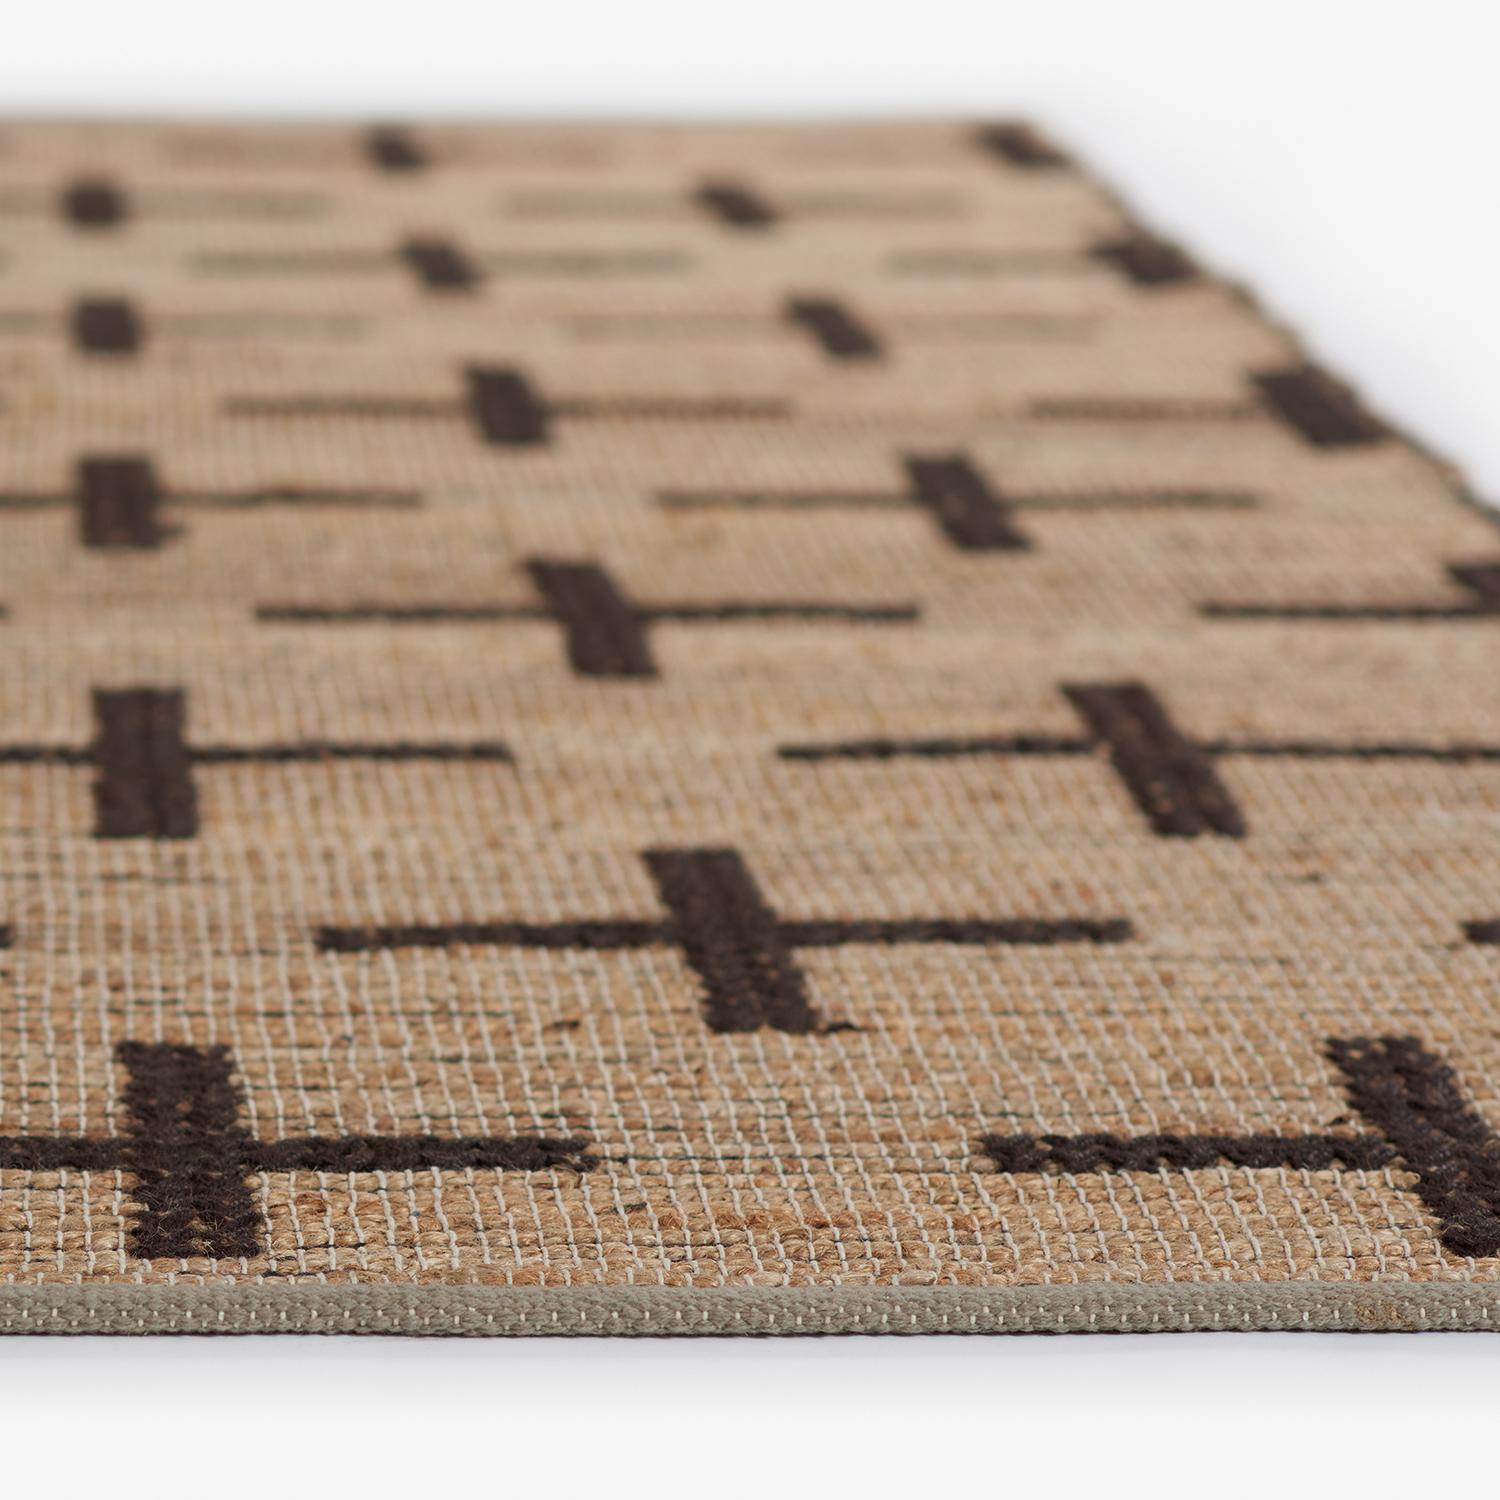 “Pontoise Lilas” Handwoven Jute Rug by Christiane Lemieux In New Condition For Sale In New York, NY